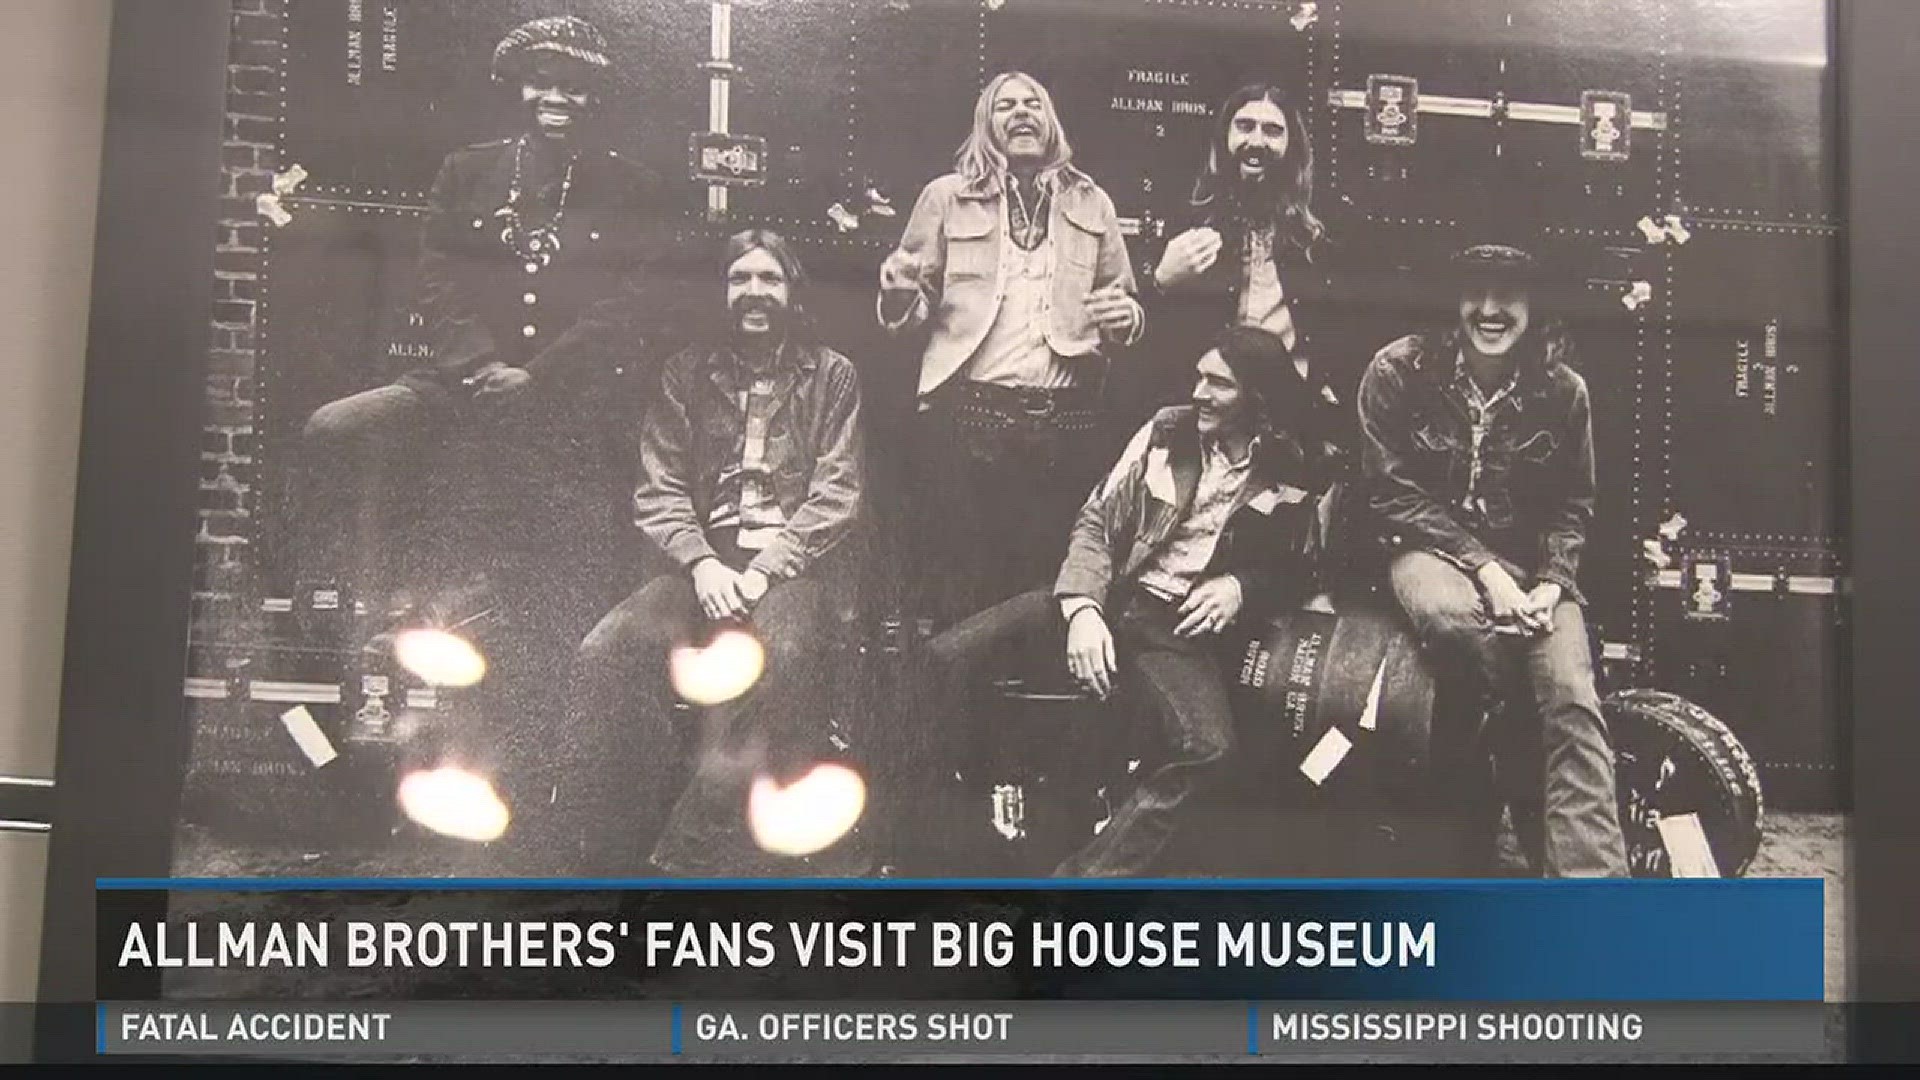 Allman Brothers Band fans visit the Big House Museum